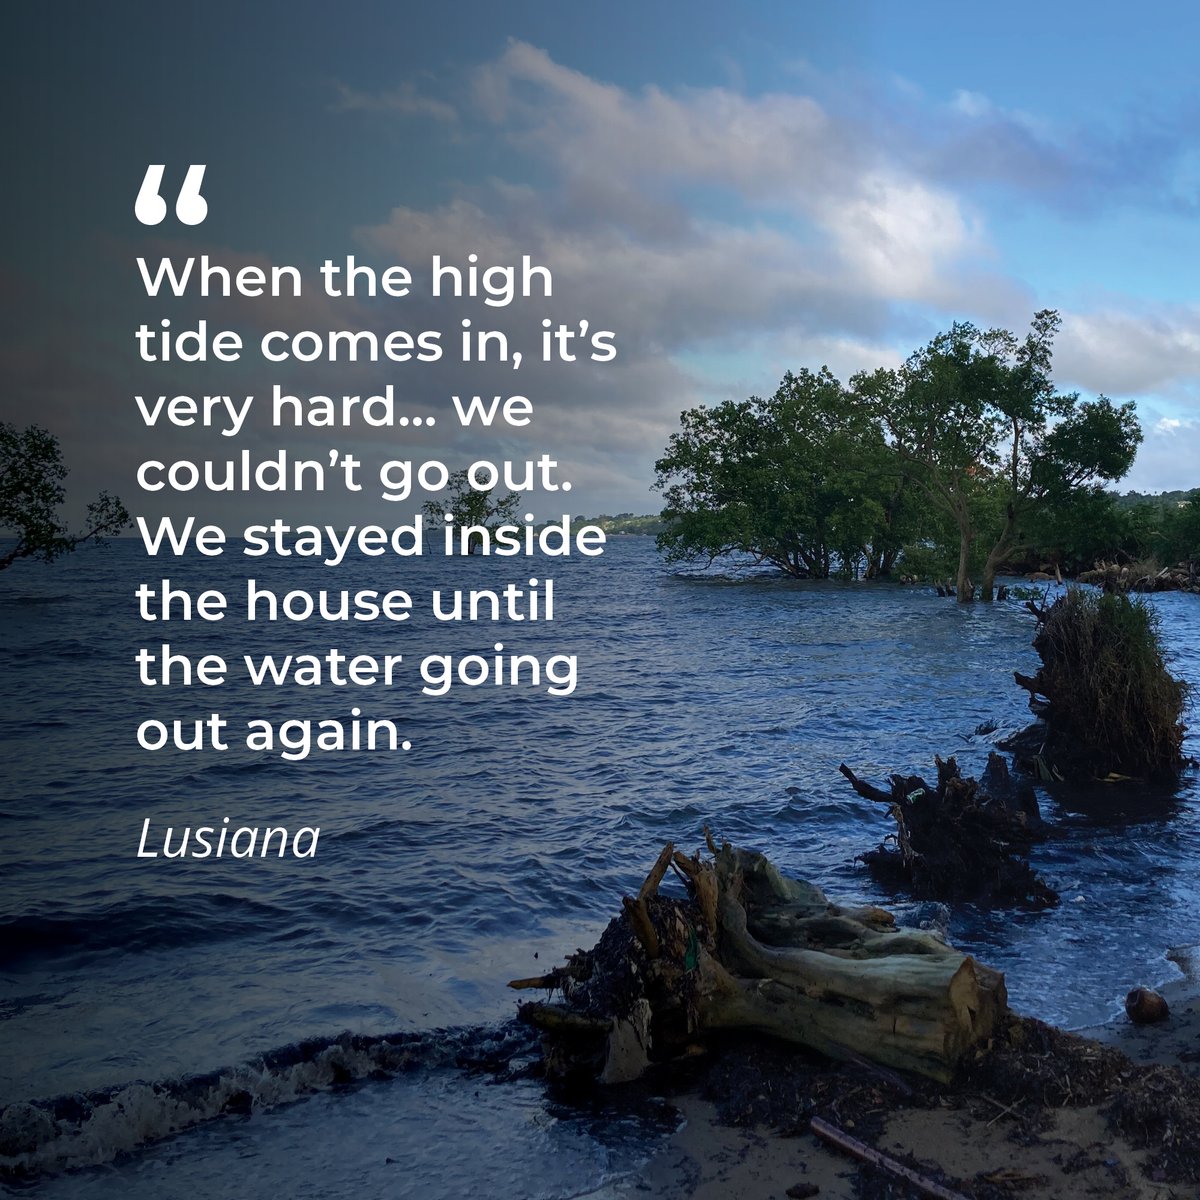 Lusi's low-lying village is already feeling the strain of rising seas. As the climate crisis worsens, it's essential to include people with disabilities in disaster risk reduction to ensure no one is left behind. Read more about it here bit.ly/47nnW76